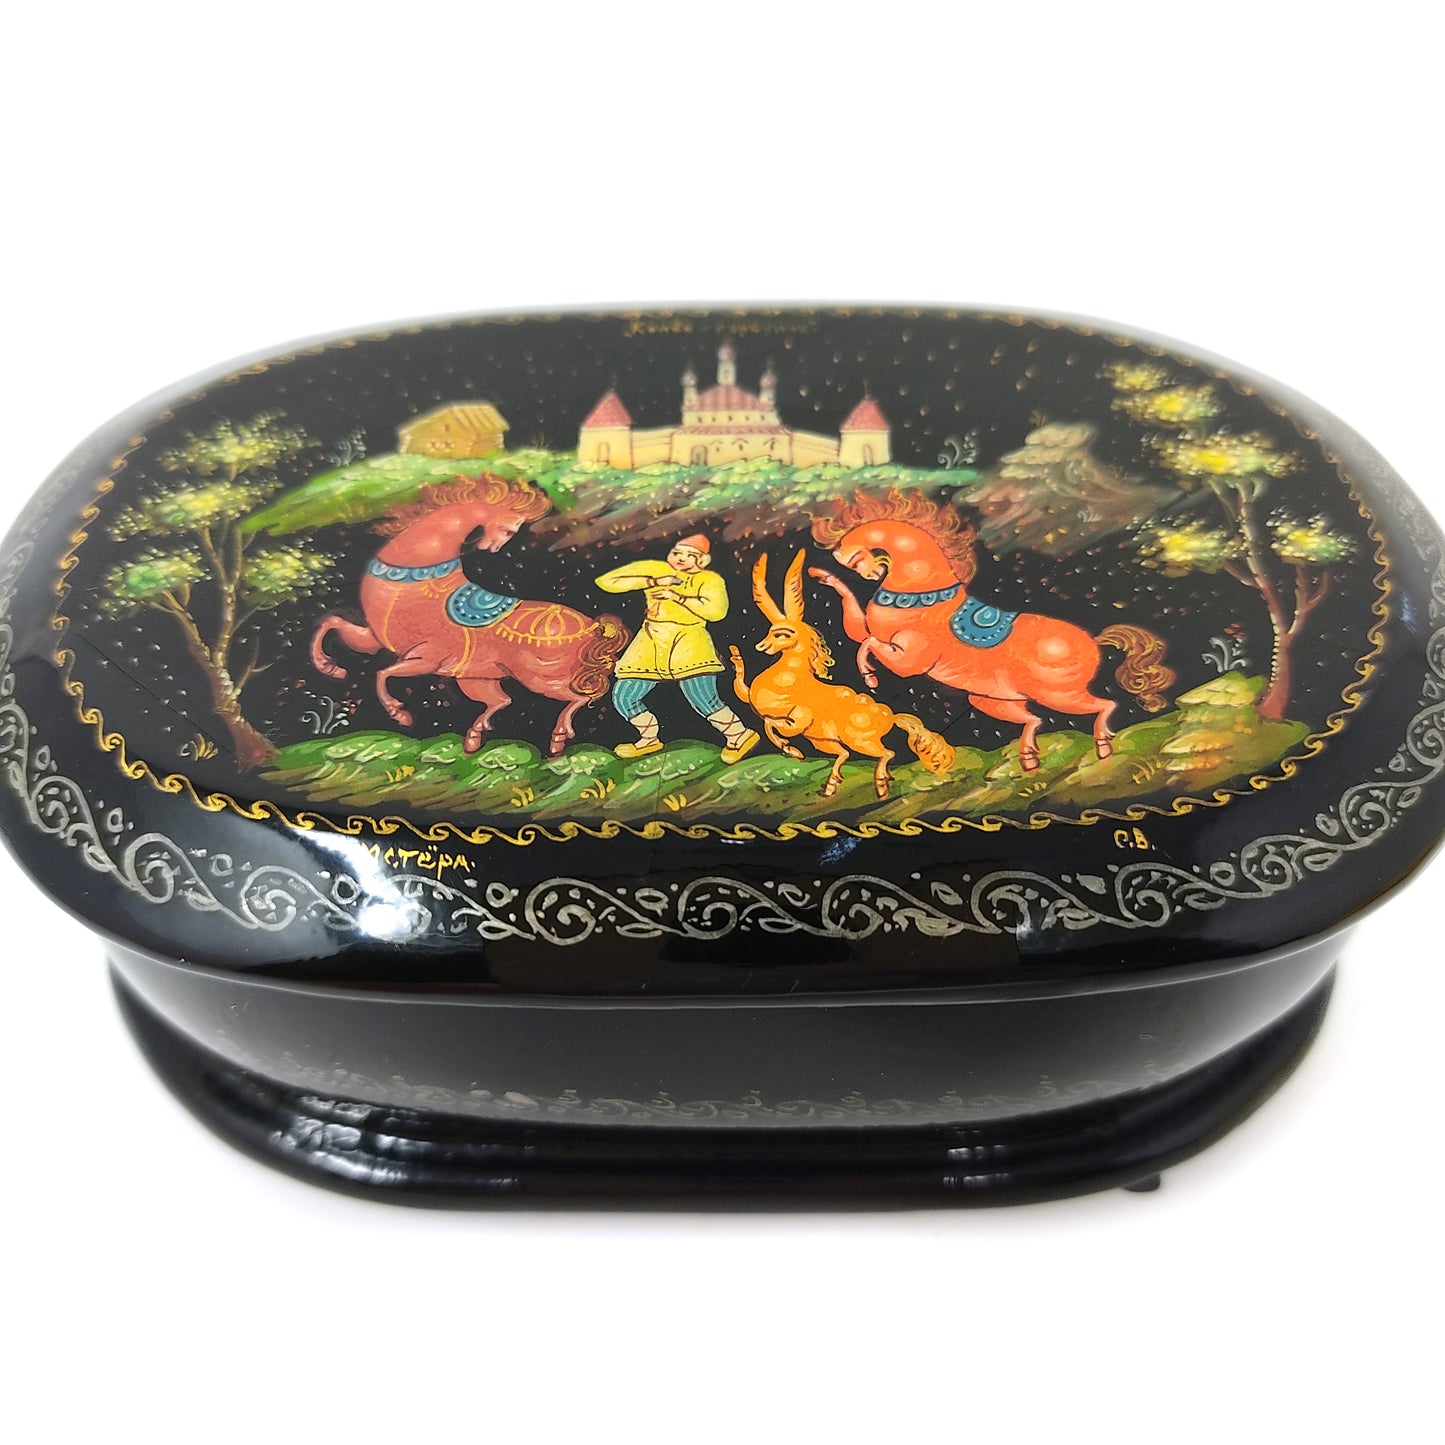 Hand Painted Signed METEPA Russian Wooden Lacquer Oval Trinket Jewelry Box 4.75"